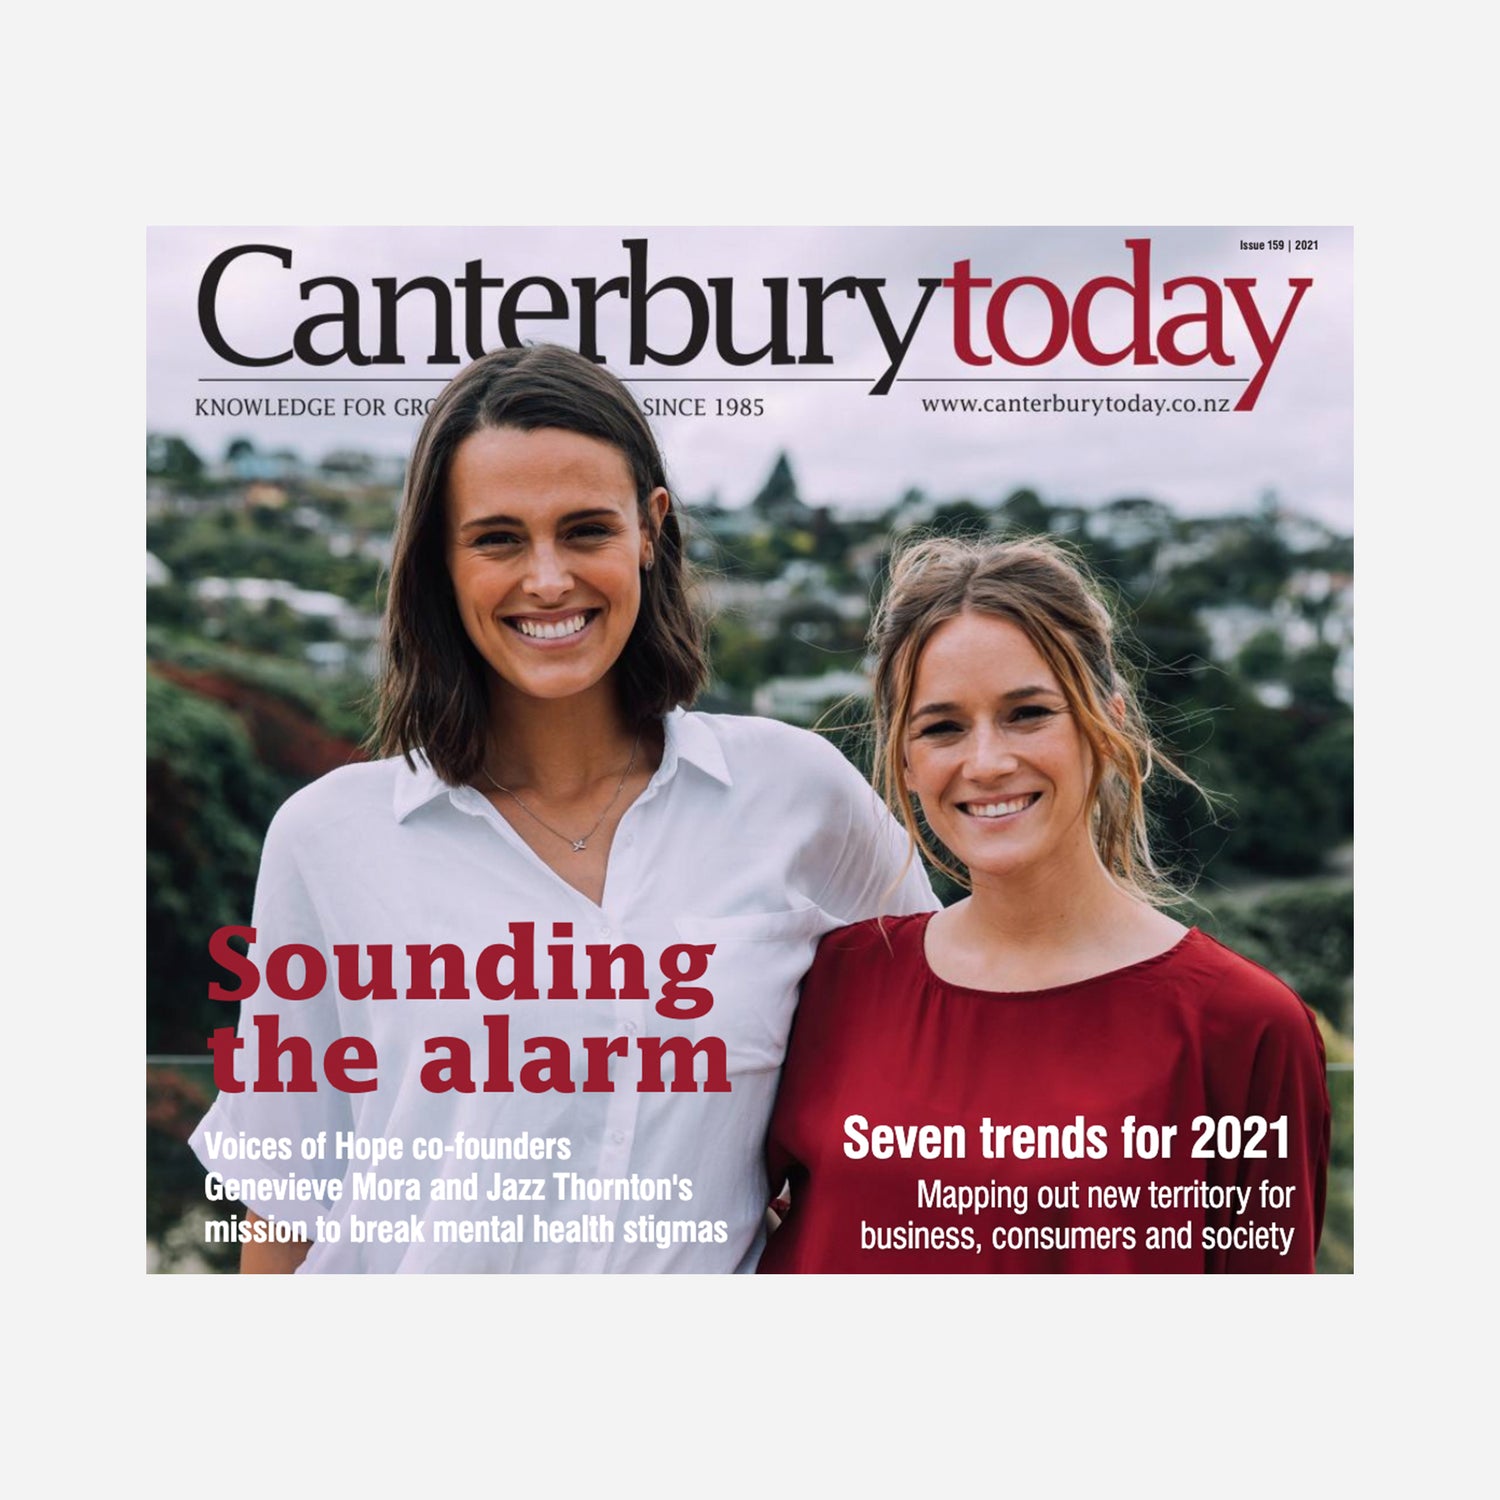 Jazz and Gen are featured in an article for Canterbury Today Magazine